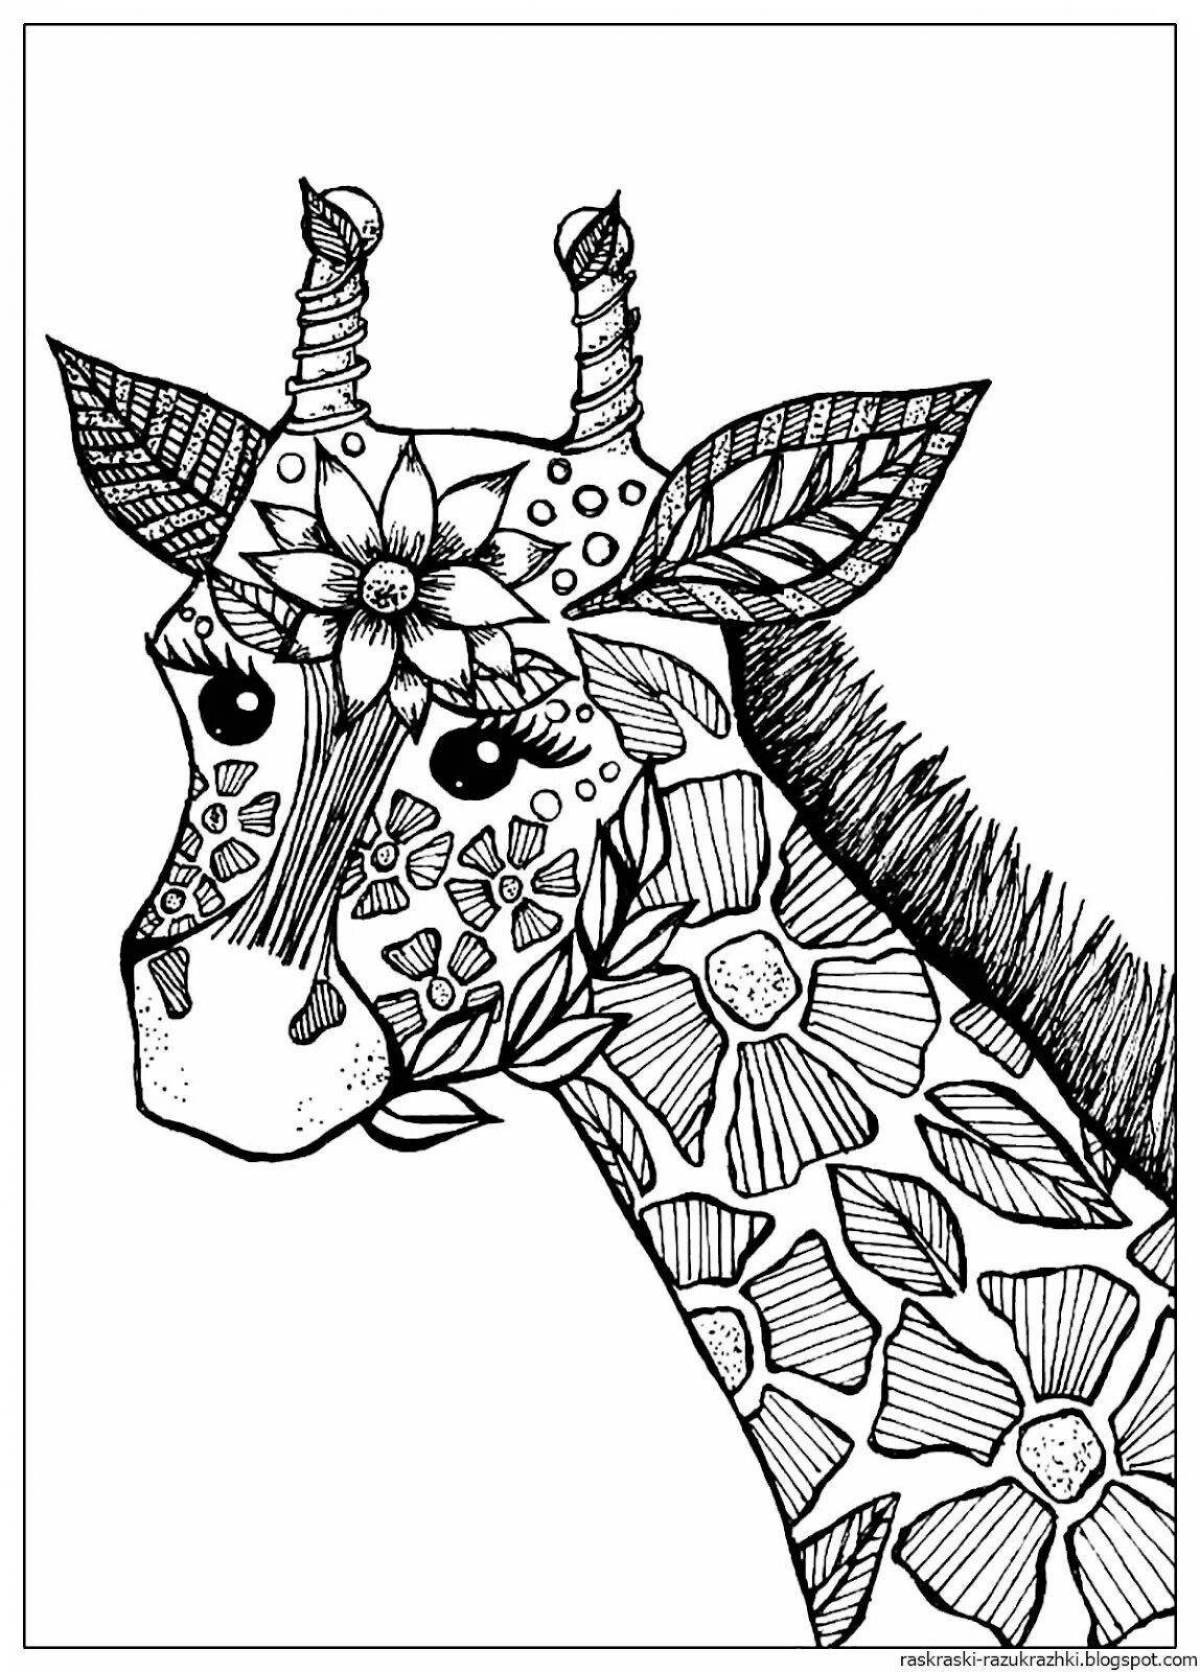 Funny antistress coloring book for girls animals